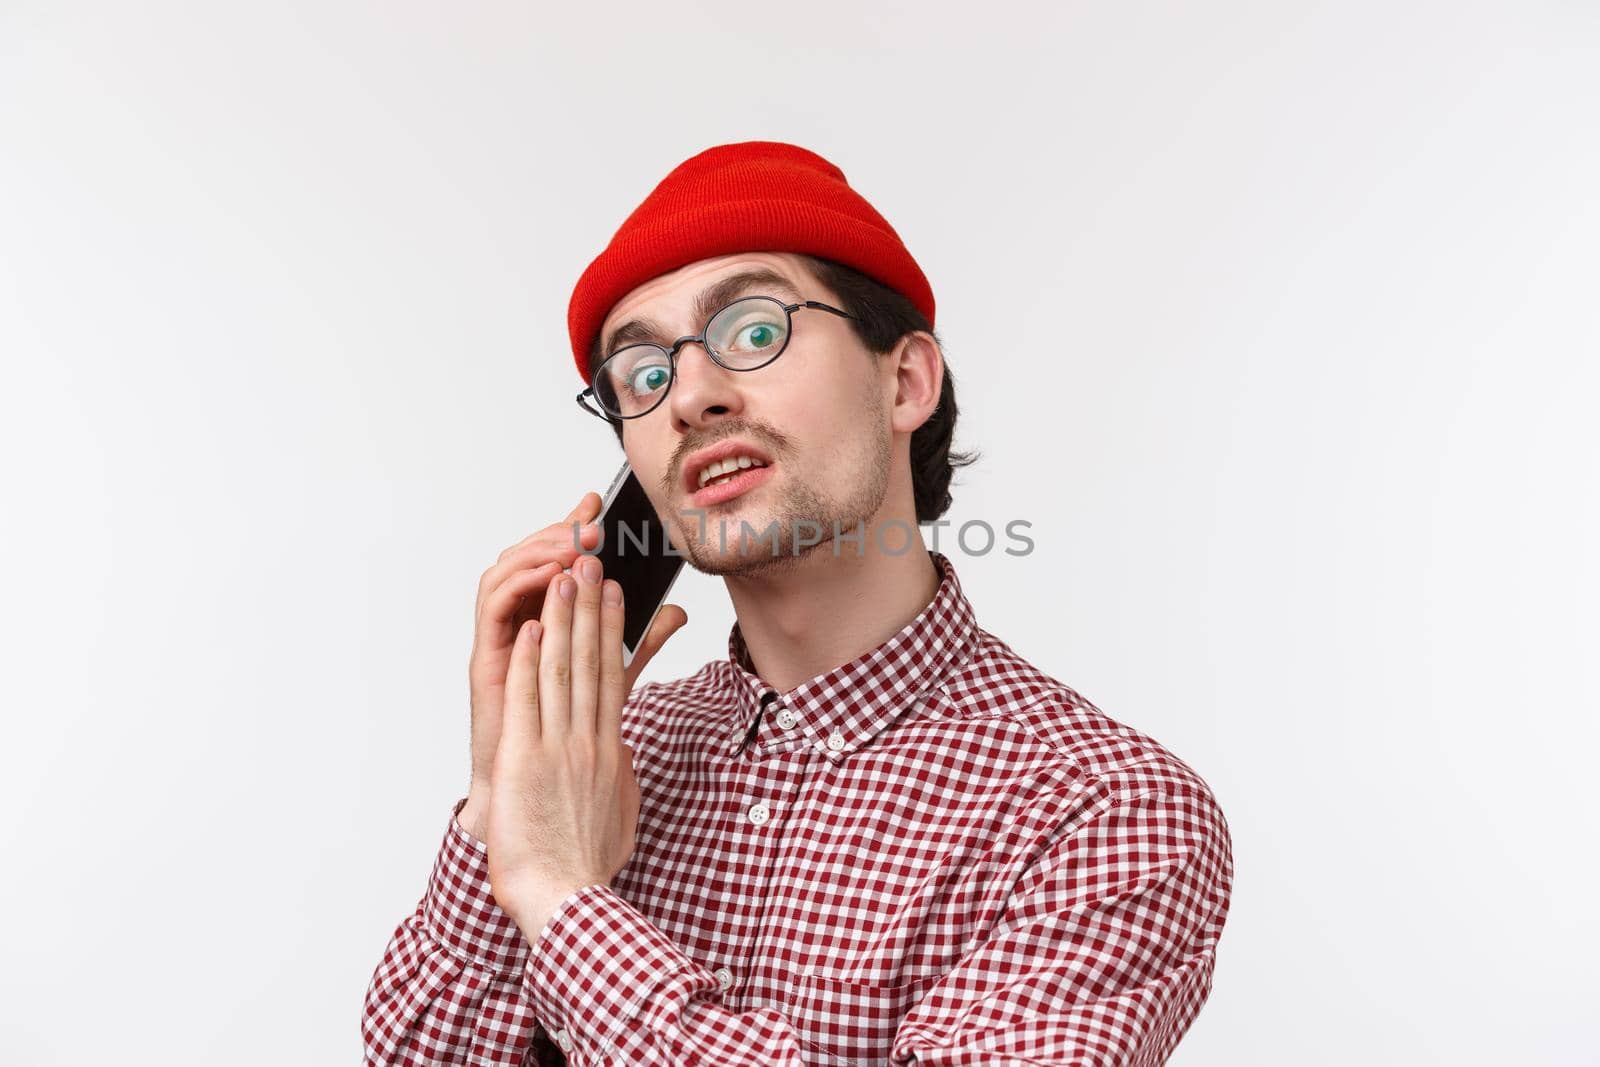 Portrait of busy guy talking on phone, asking hold on minute as have important conversation, calling friend on mobile, cover dynamic to tell wait sec, standing white background with smartphone.